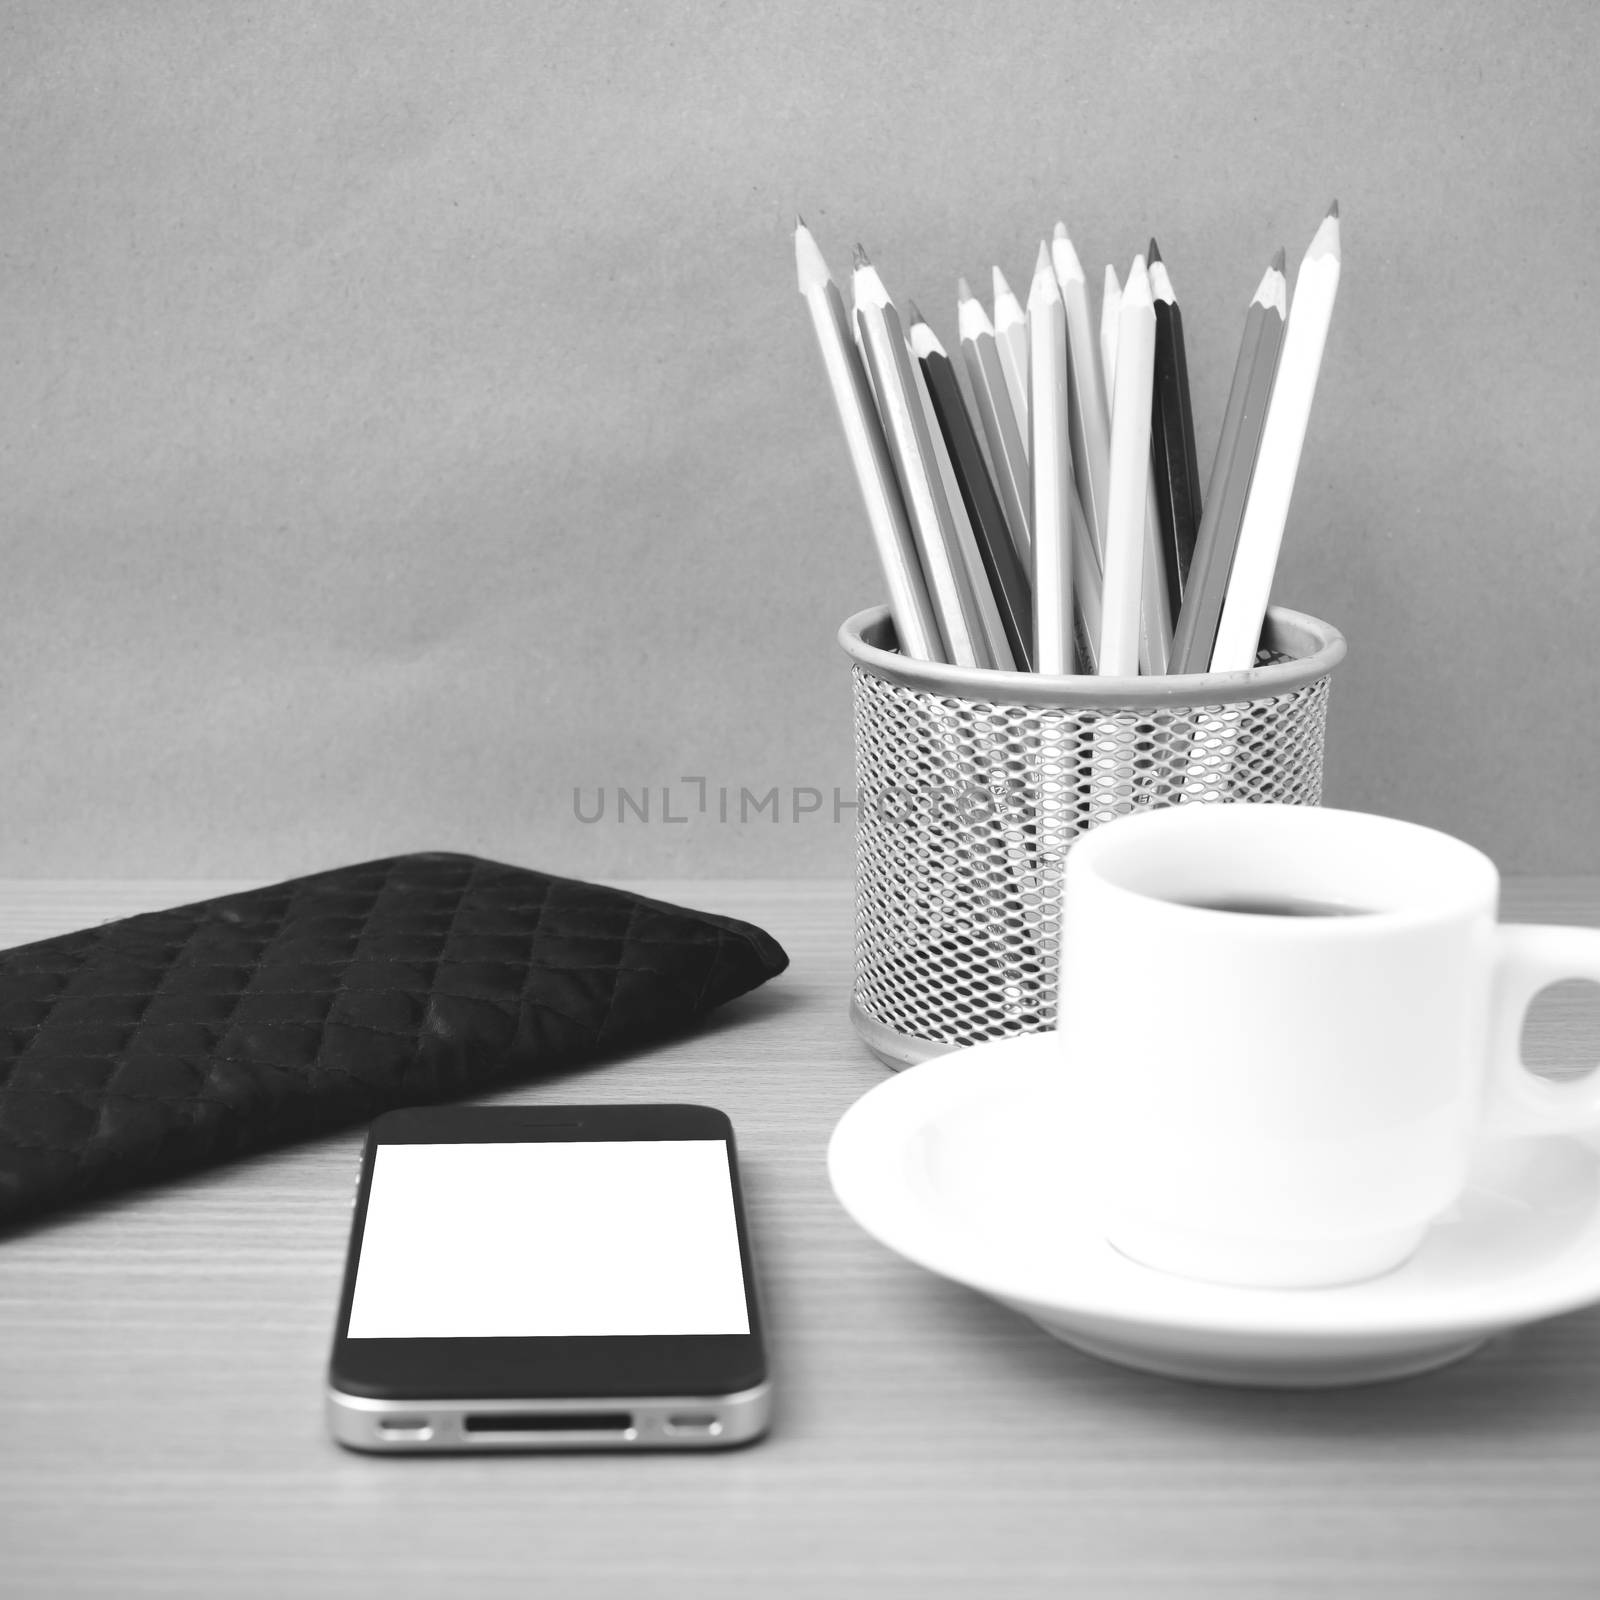 coffee,phone,wallet and color pencil on wood table background black and white color